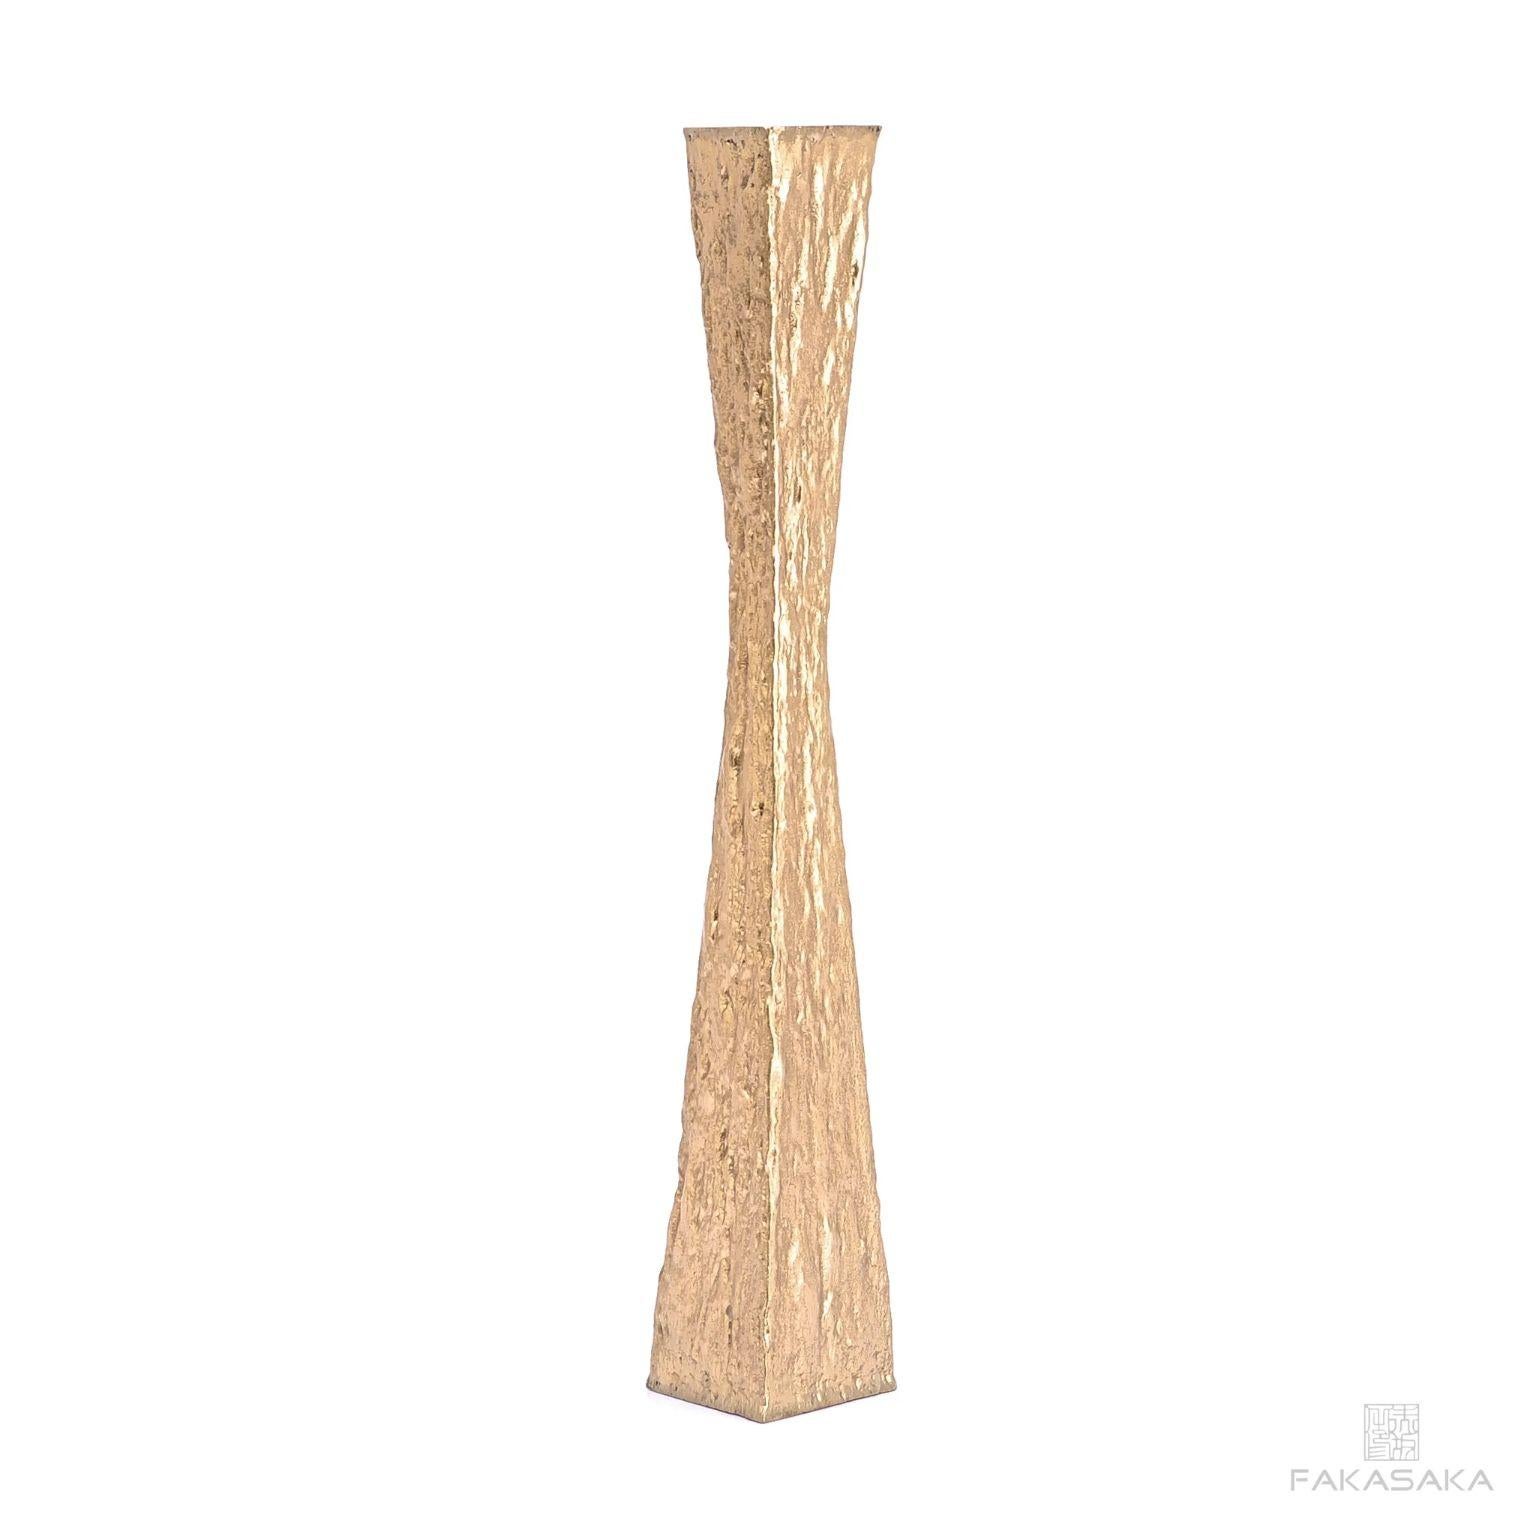 Janis candleholder by Fakasaka design.
Dimensions: W 8 cm D 8 cm H 41 cm.
Materials: polished bronze.

 Fakasaka is a design company focused on production of high-end furniture, lighting, decorative objects, jewels, and